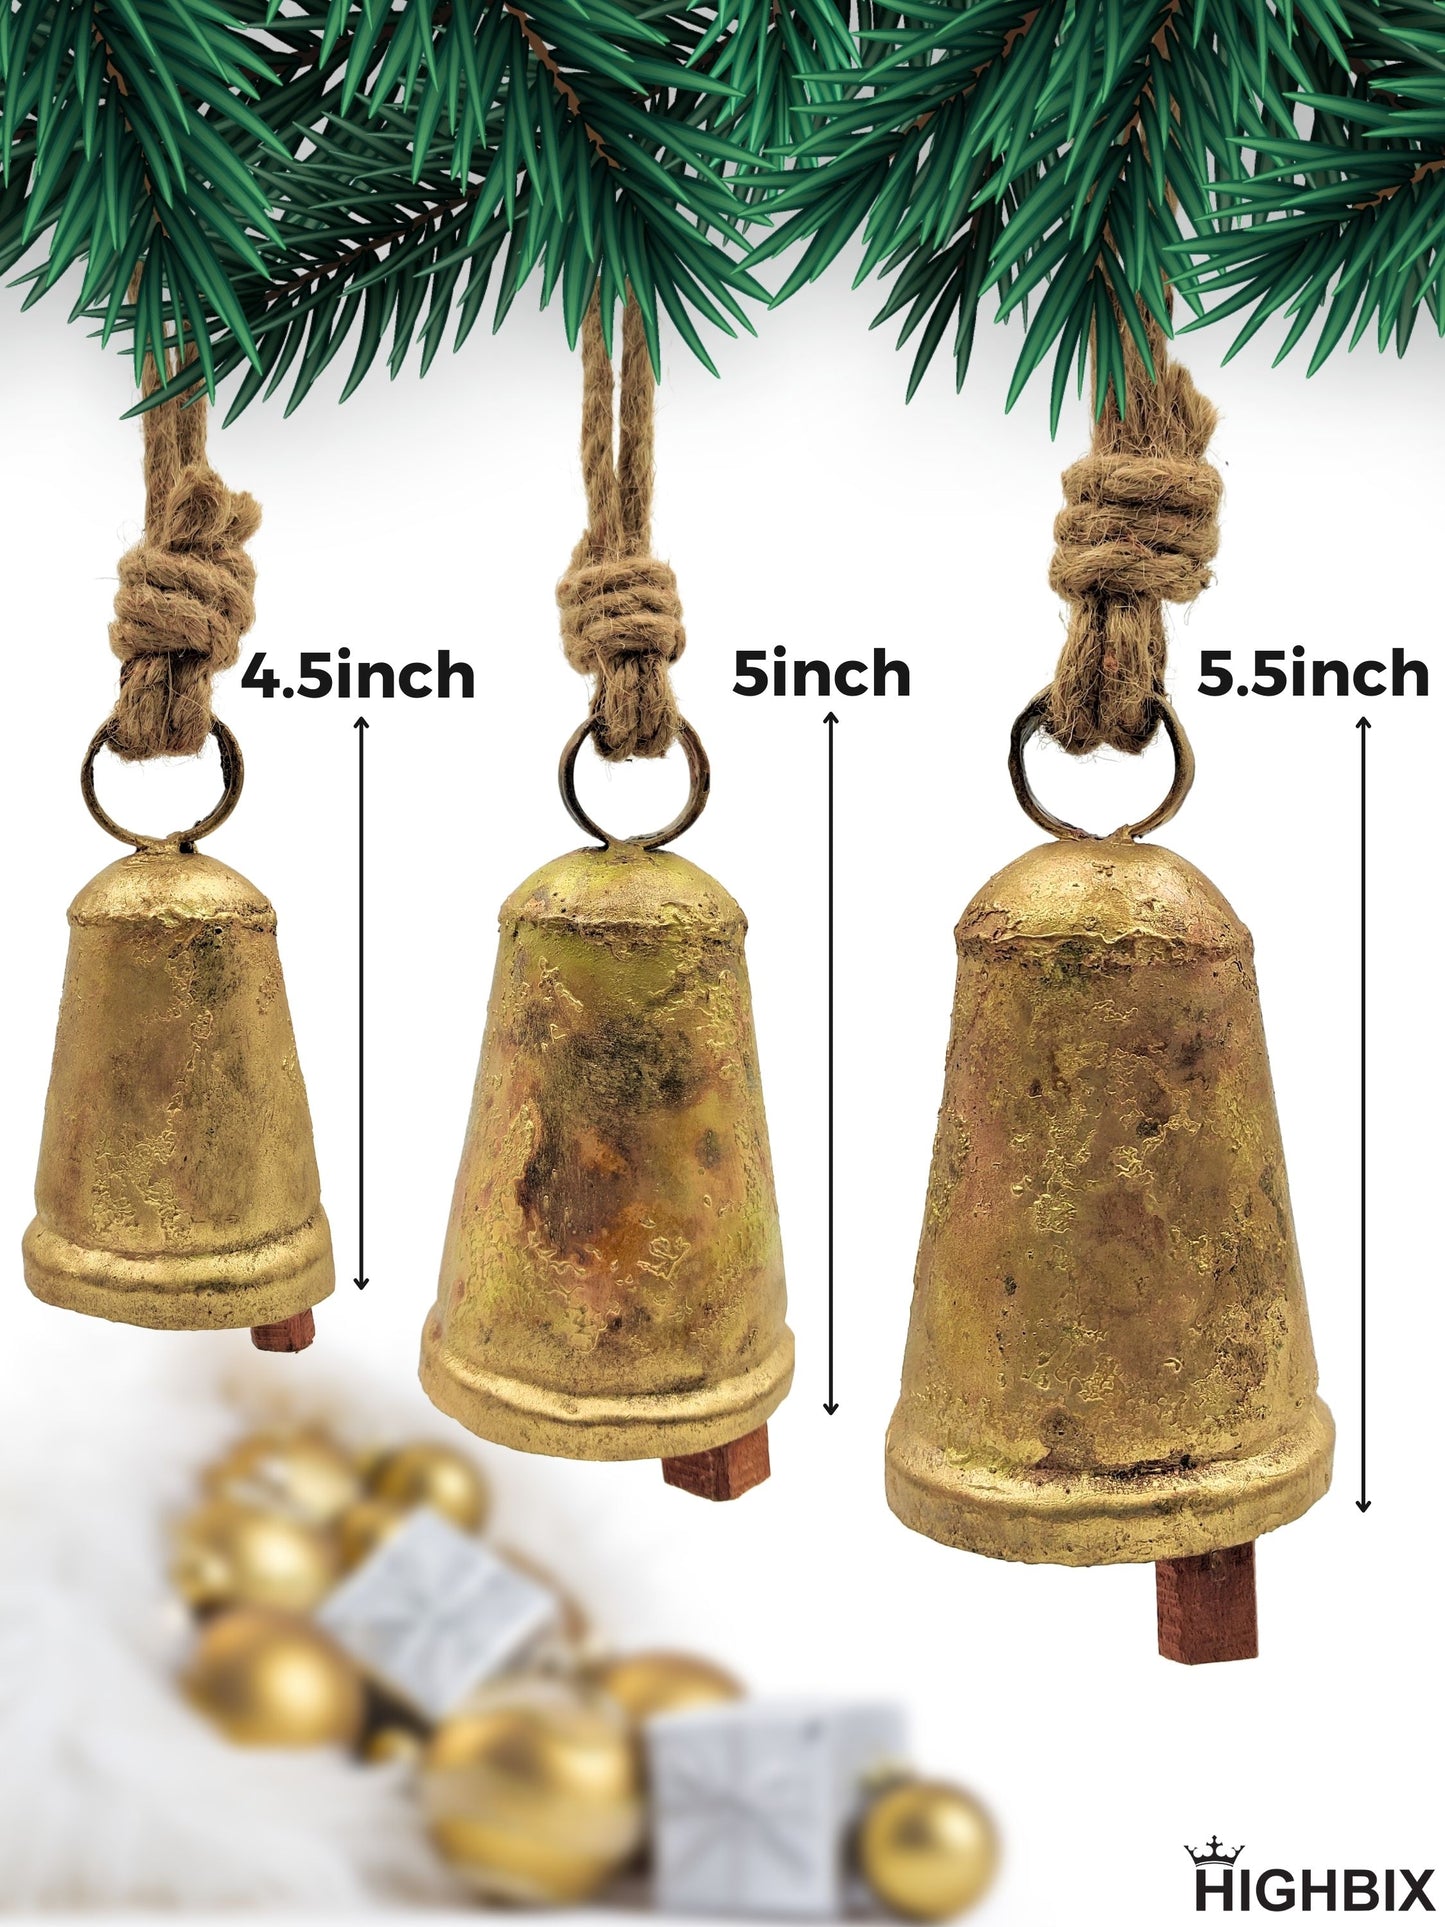 Set of 3 Rustic Harmony Conical Cow Bells